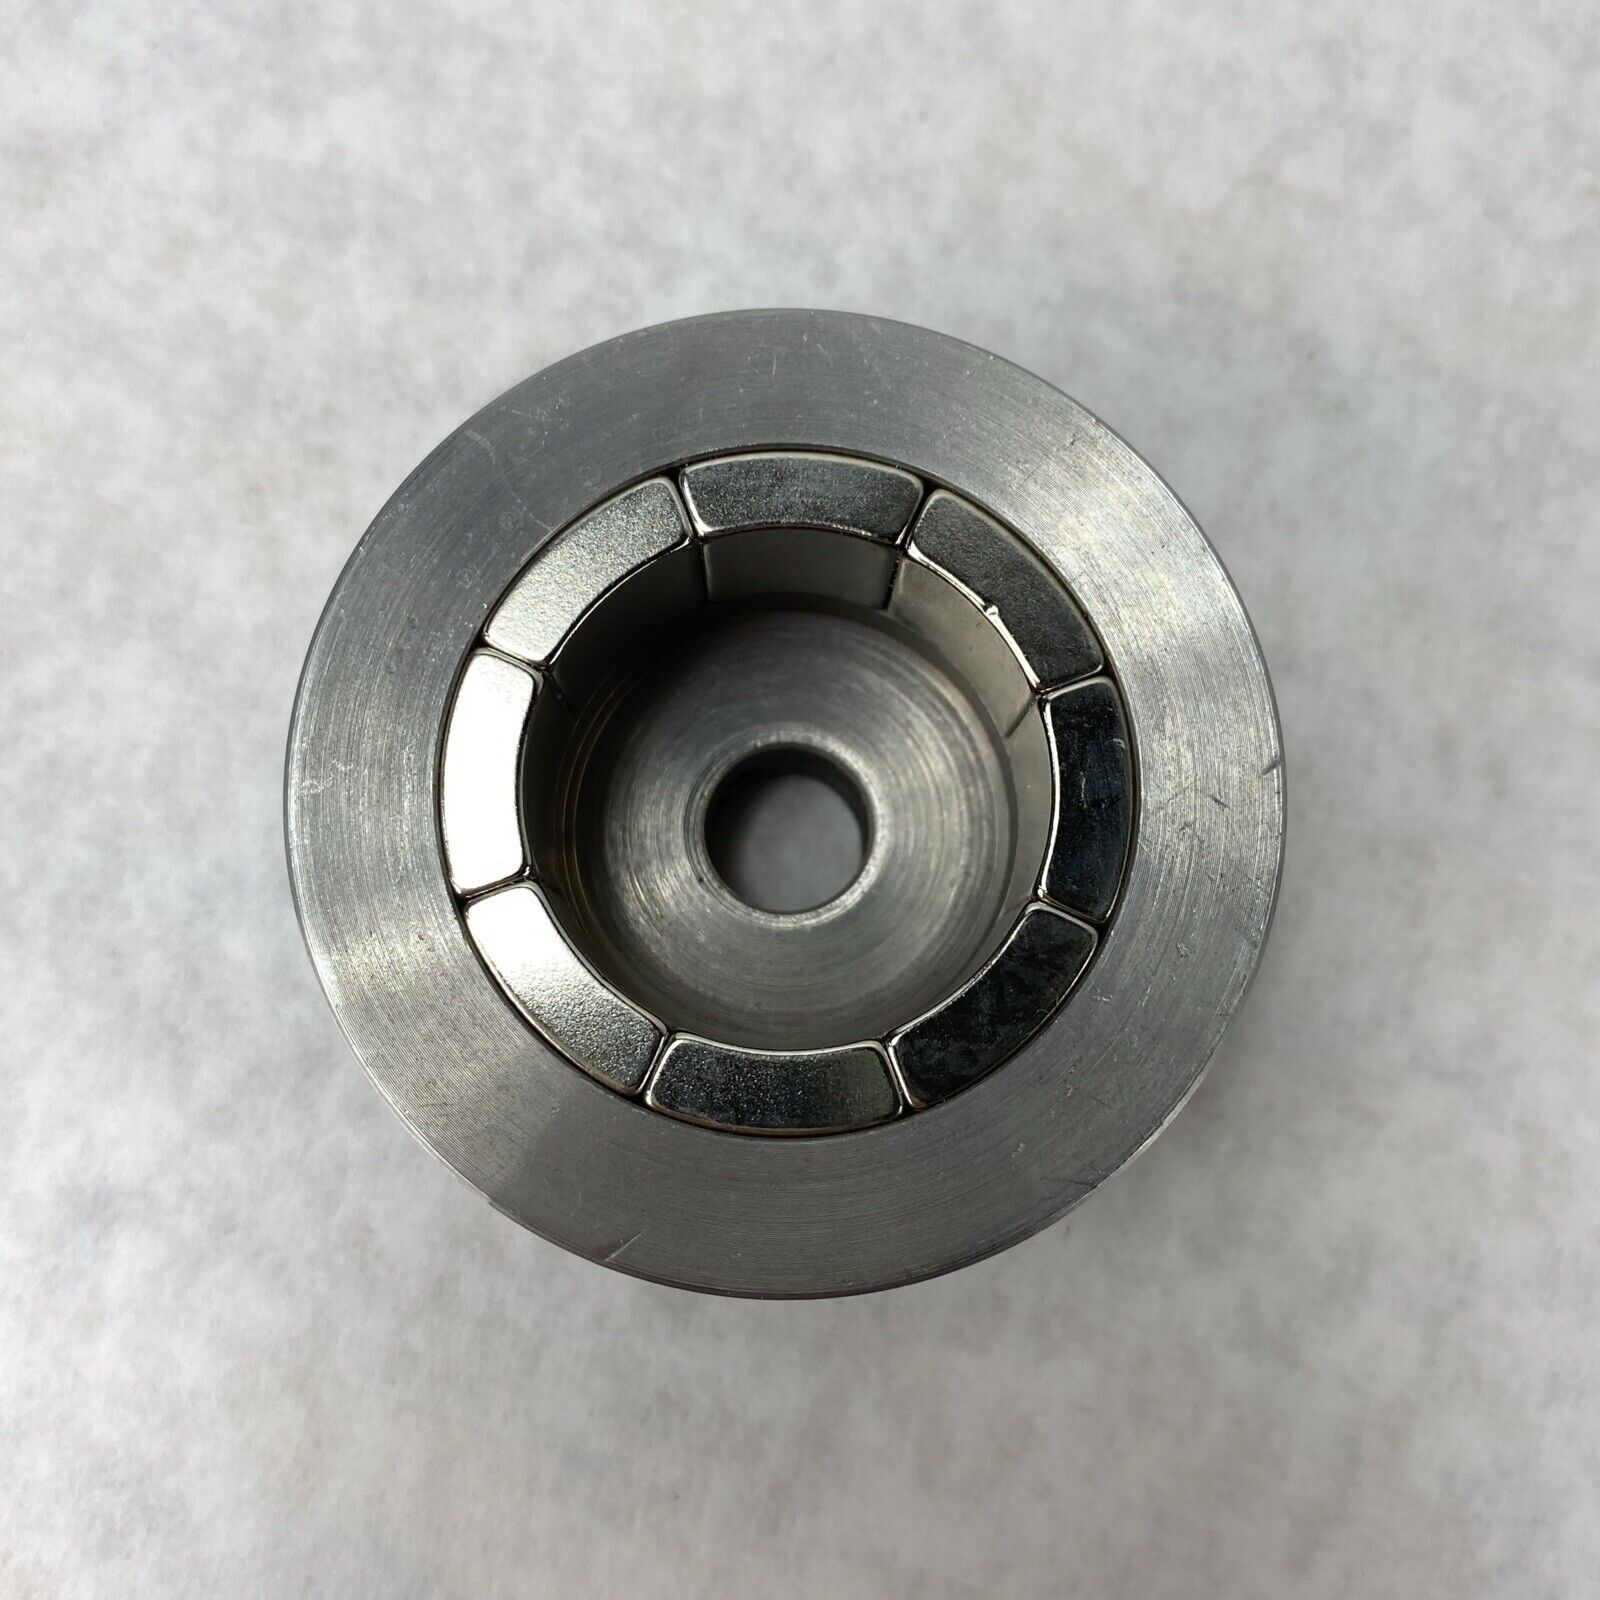 New Brunswick P0660-1172 Magnet Ring .5"ID Assembly